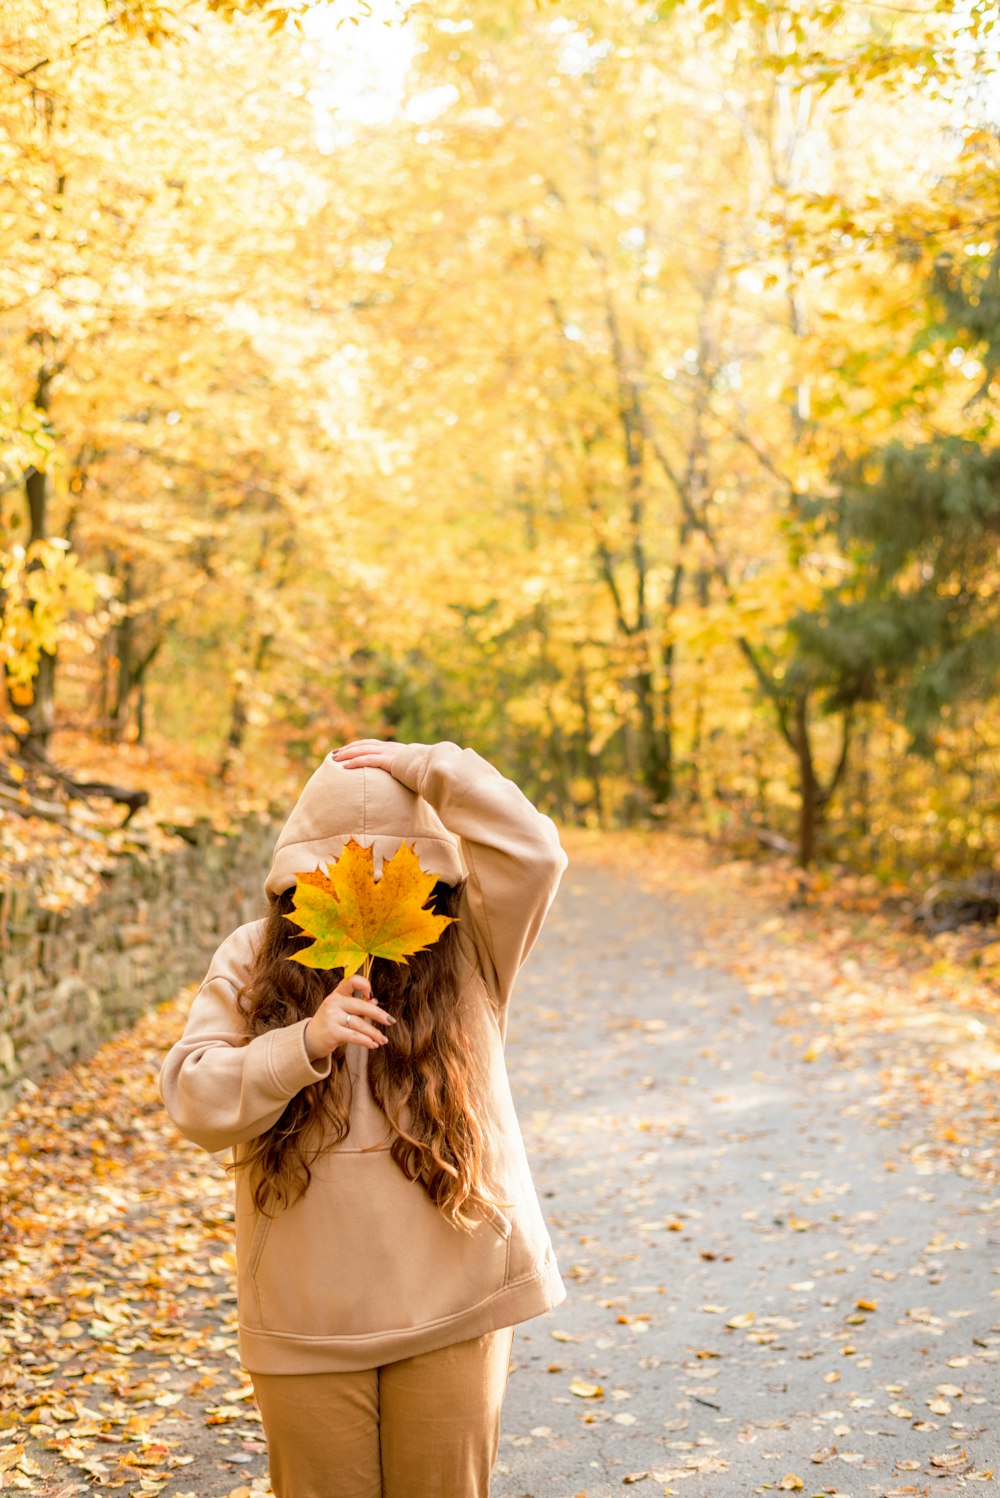 a woman walking down a leaf covered road